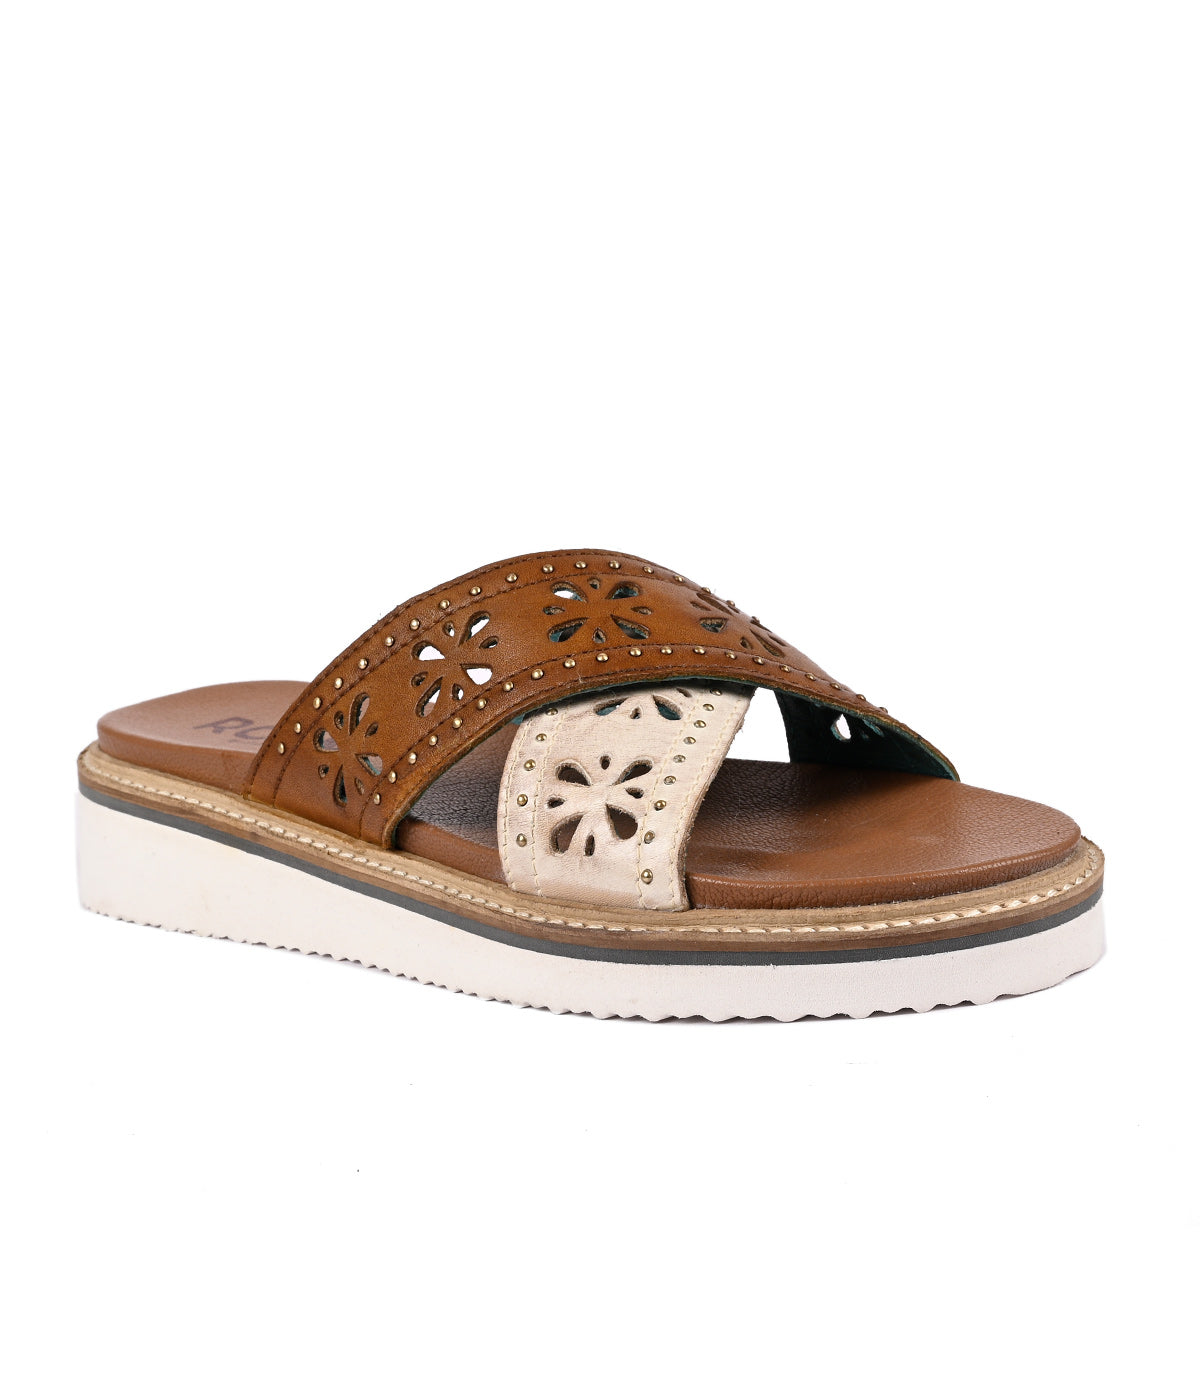 Brown women's lightweight slide-on sandal with cut-out designs on a white background by Roan Chant.